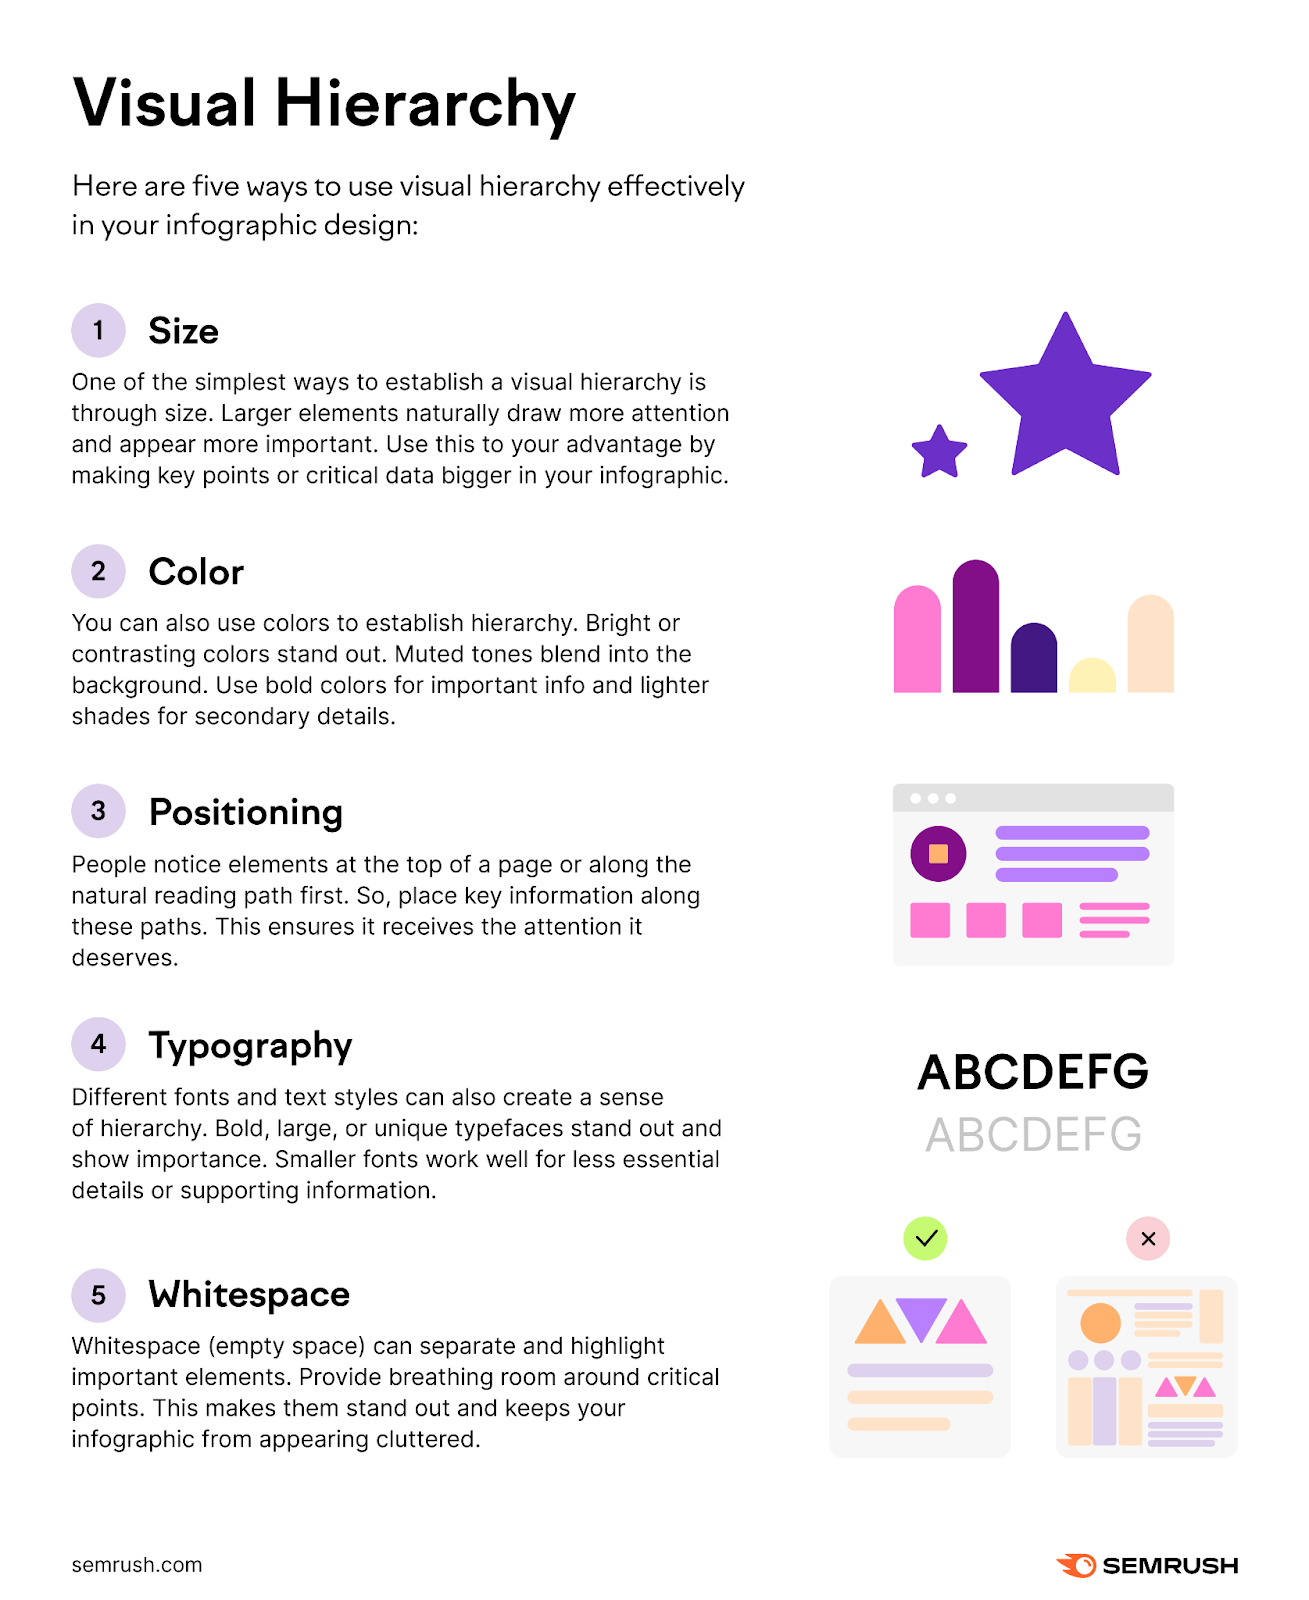 Semrush's infographic on "Visual hierarchy" listing the five ways to use visual hierarchy effectively in infographic design